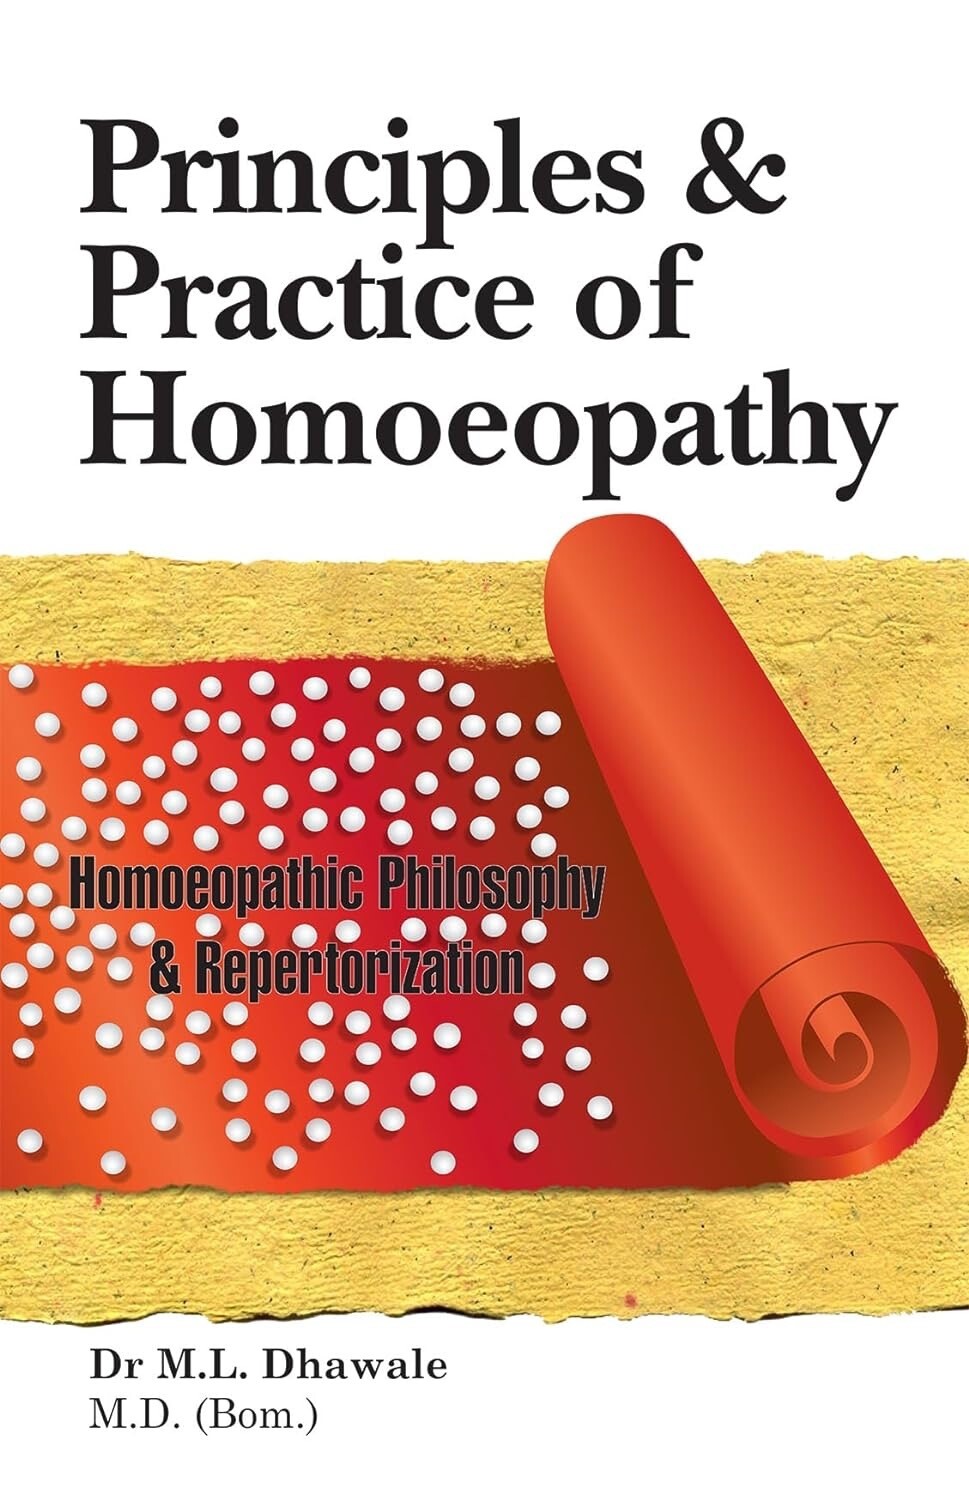 Principles & Practice of Homoeopathy...
Homoeopathic Philosophy and Repertorization (Dhawale)